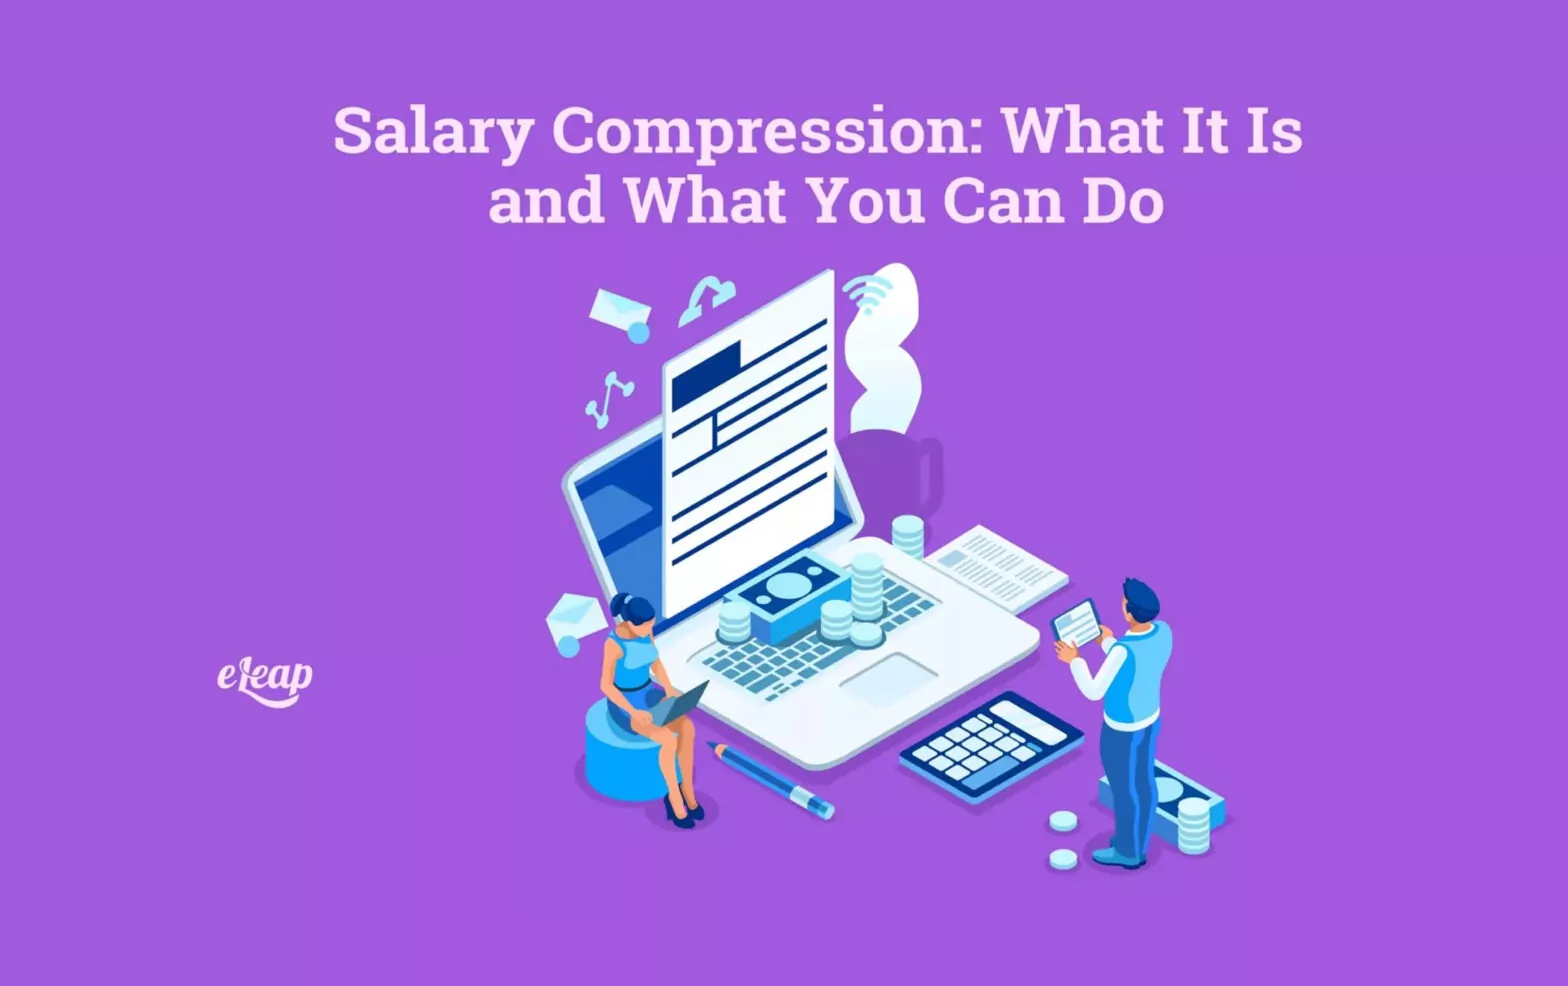 Salary Compression: What It Is and What You Can Do